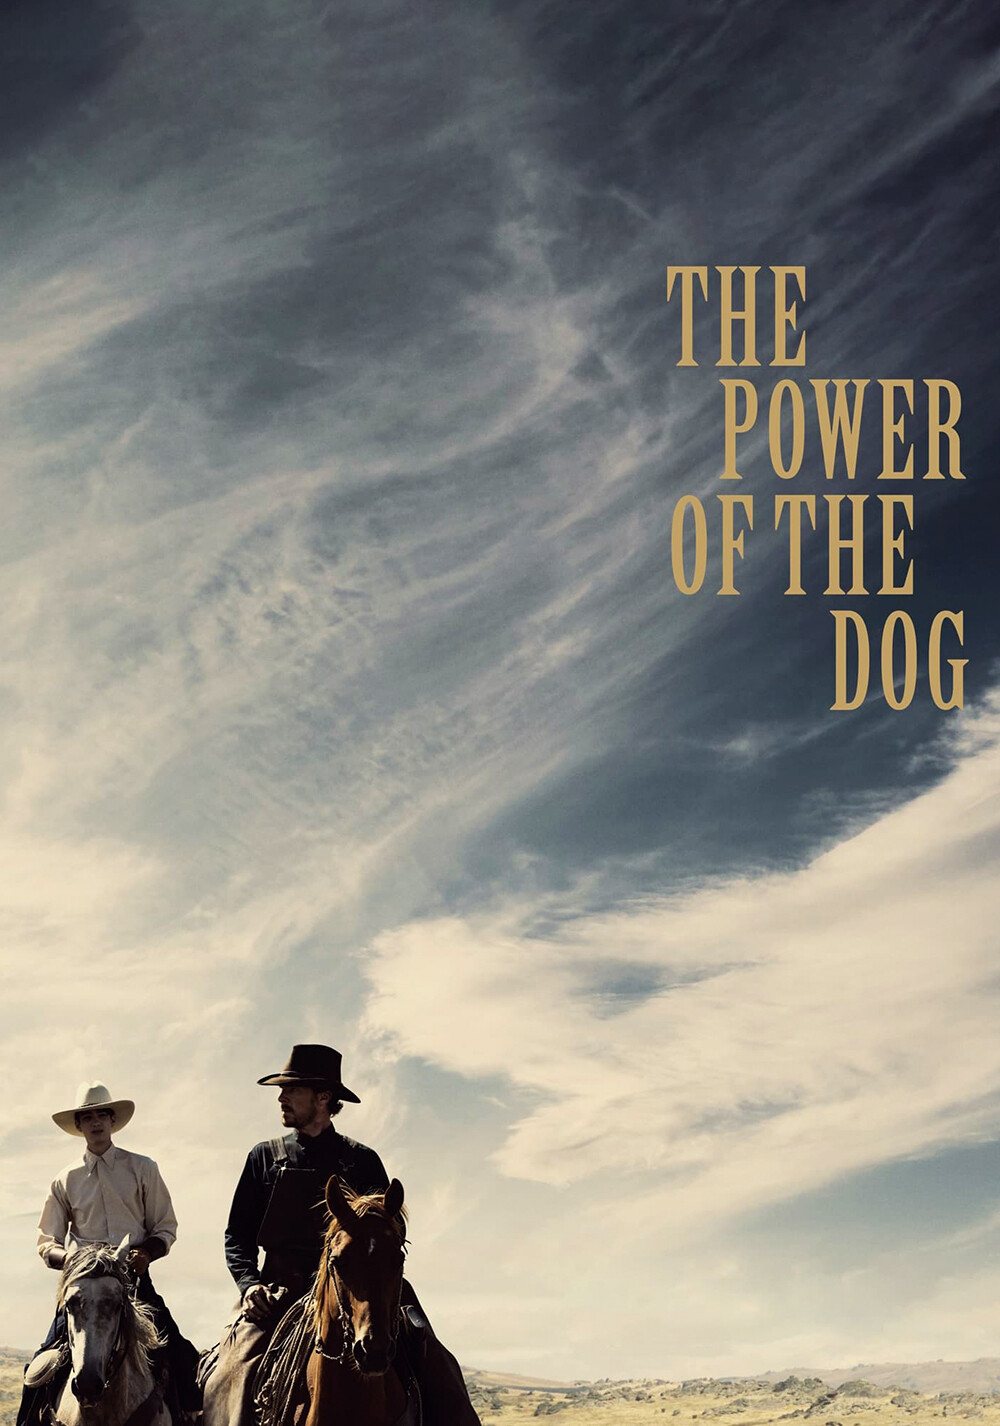 The Power of the Dog 2021 2160p BluRay x264 8bit SDR DTS-HD MA TrueHD 7 1 Atmos-SWTYBLZ